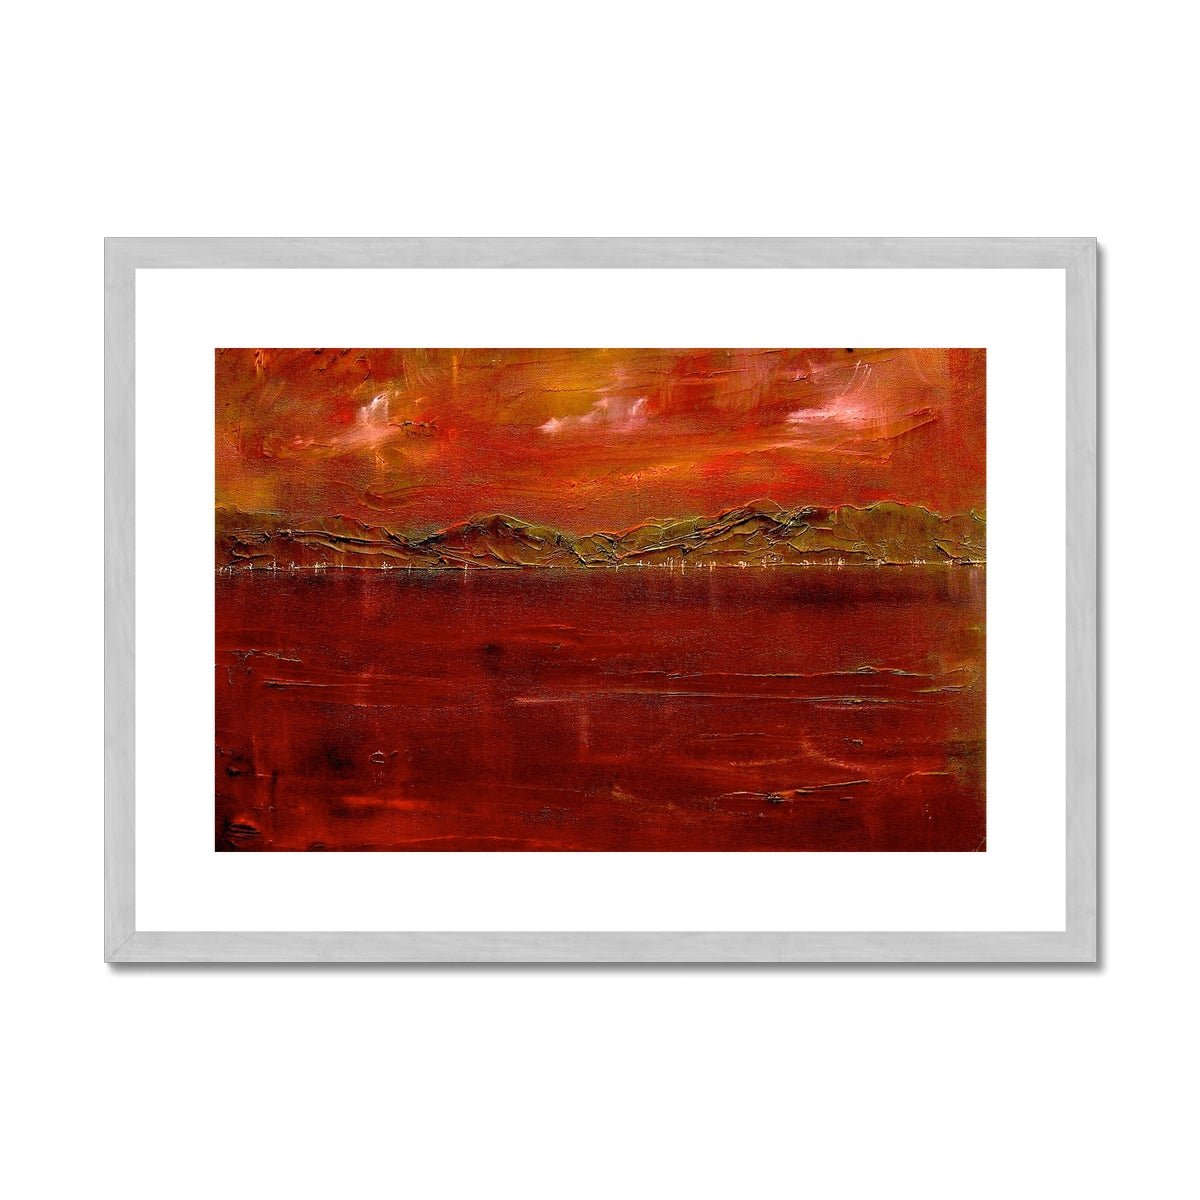 Deep Clyde Dusk Painting | Antique Framed & Mounted Prints From Scotland-Antique Framed & Mounted Prints-River Clyde Art Gallery-A2 Landscape-Silver Frame-Paintings, Prints, Homeware, Art Gifts From Scotland By Scottish Artist Kevin Hunter